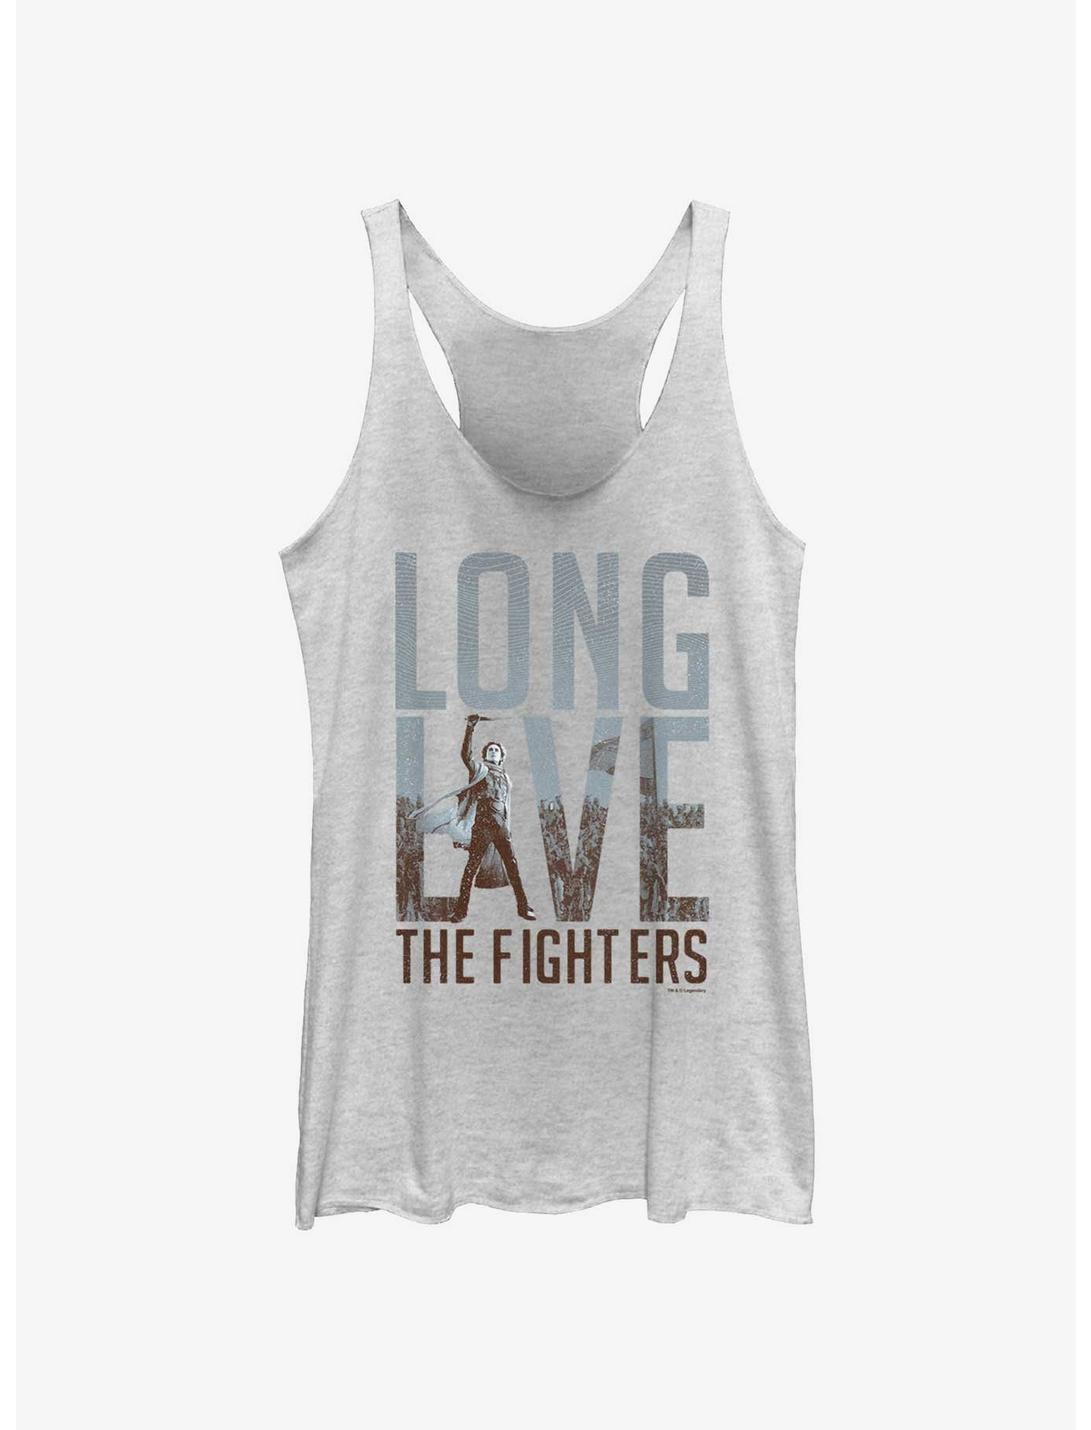 Dune Long Live The Fighters Paul Womens Tank Top, WHITE HTR, hi-res